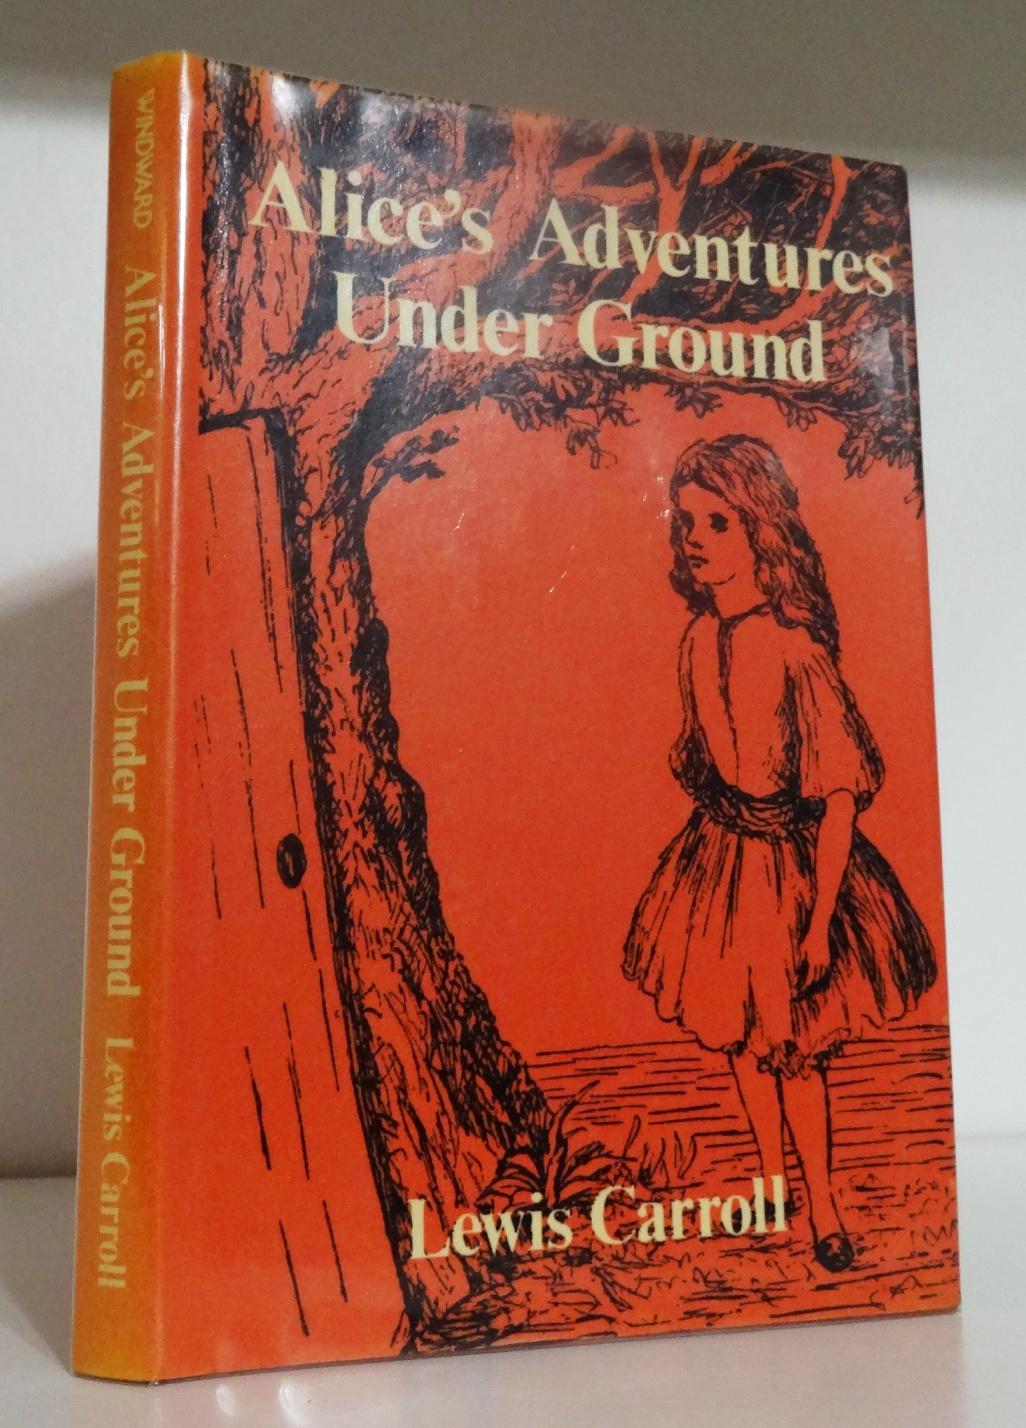 ALICE'S ADVENTURES UNDER GROUND BEING A FACSIMILE OF THE ORIGINAL MS. BOOK - CARROLL, Lewis